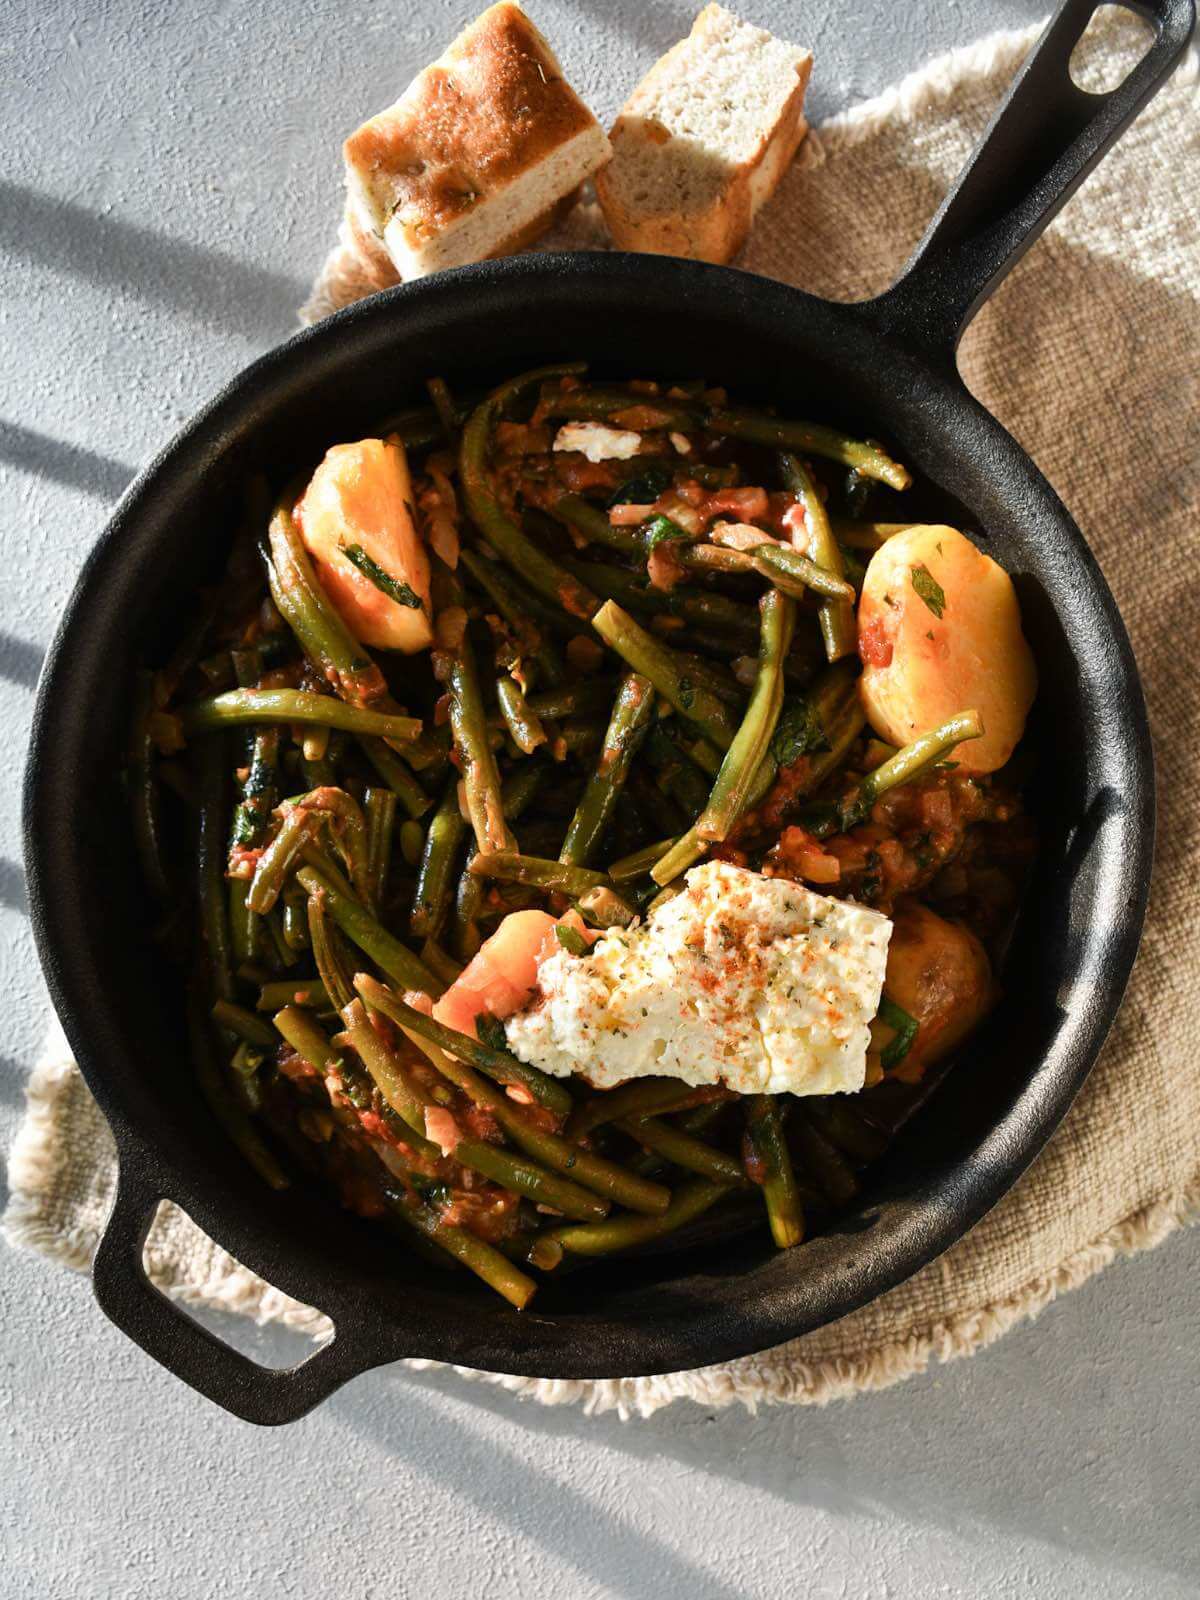 Greek green beans with tomato sauce and potatoes (fasolakia) with feta cheese displayed in a black cast iron skillet.